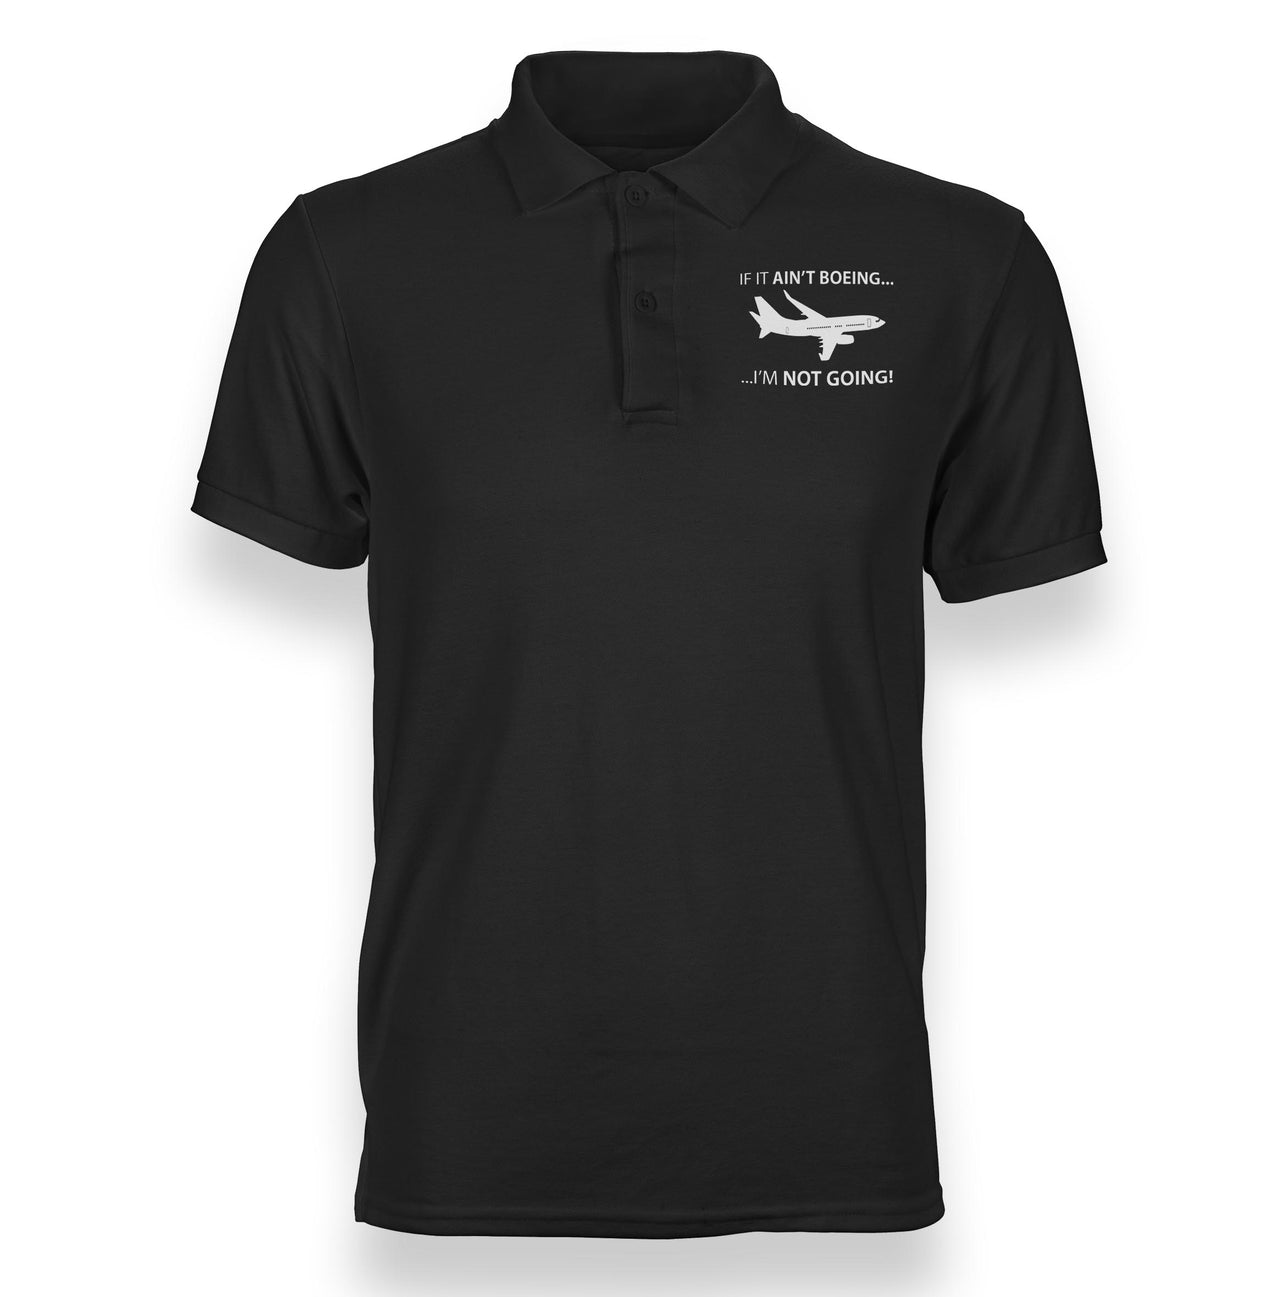 If It Ain't Boeing I'm Not Going! Designed Polo T-Shirts